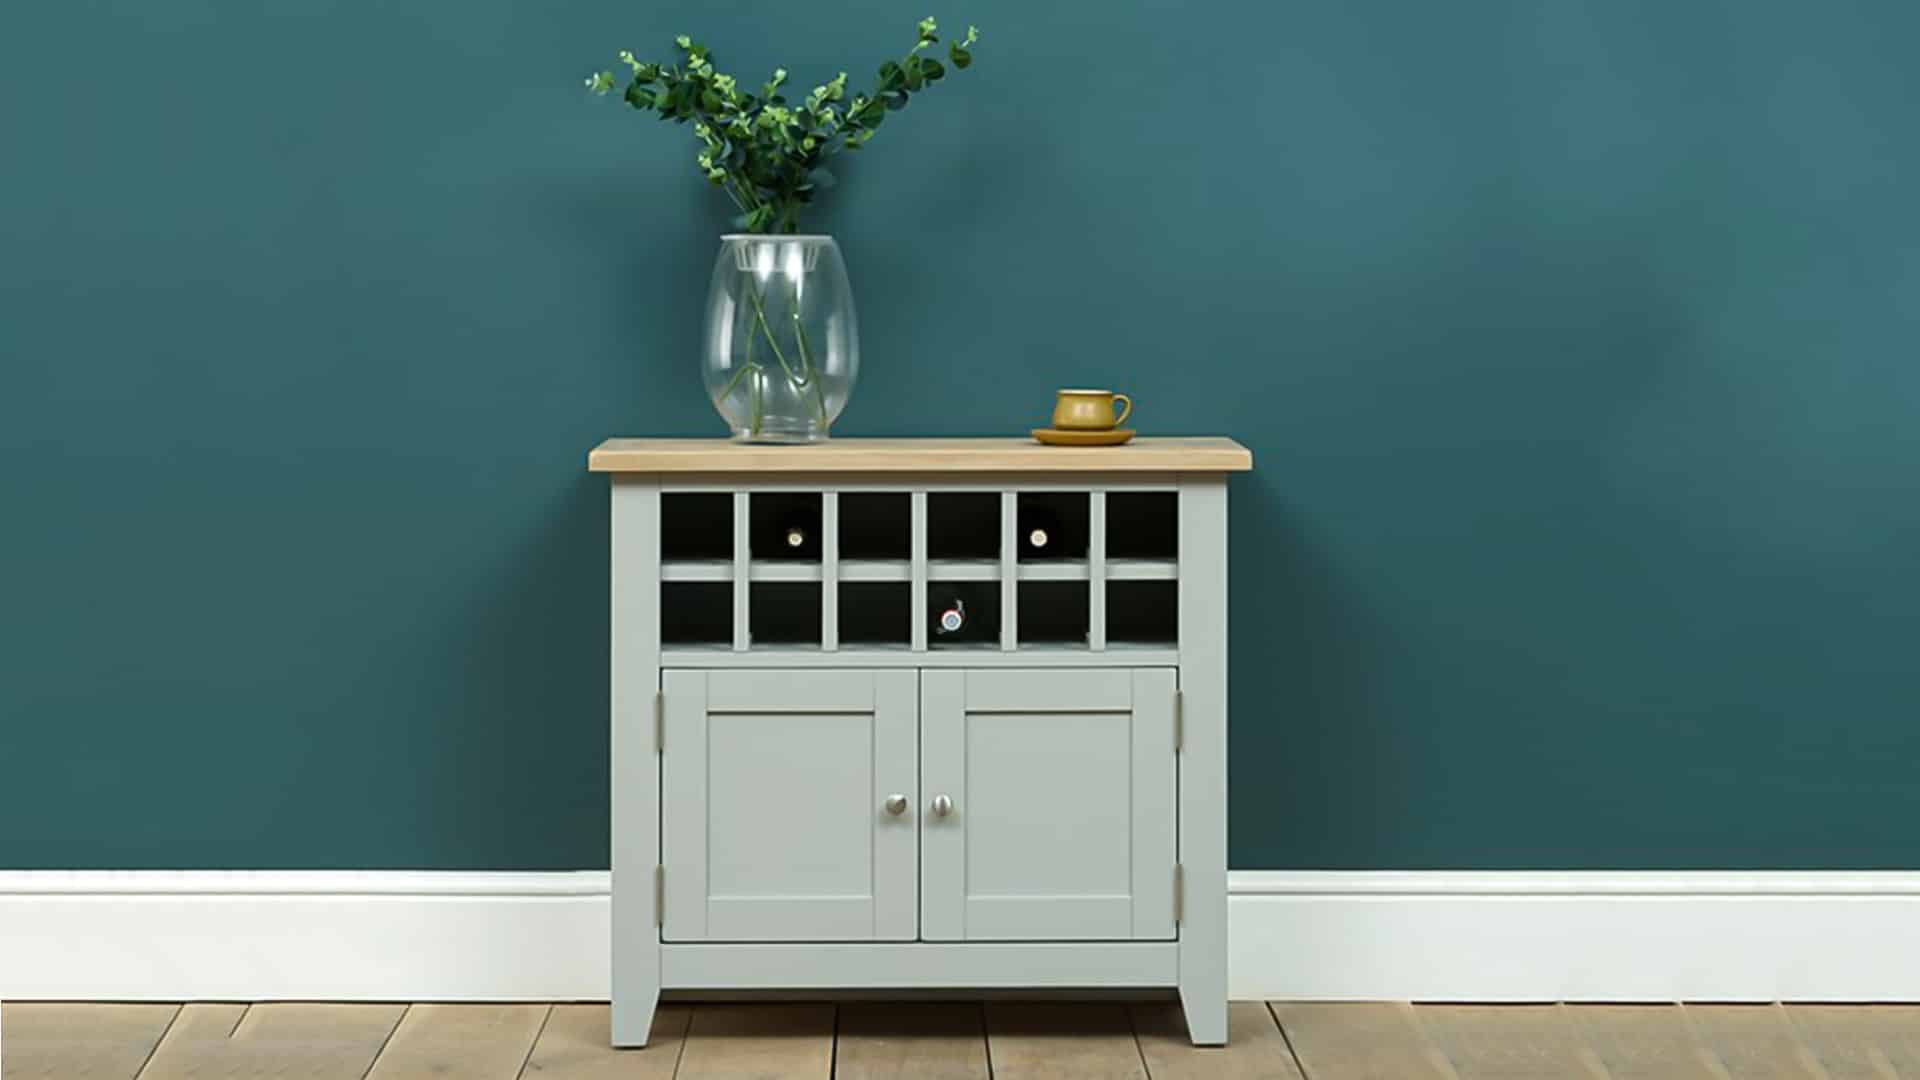 Cotswold wooden furniture